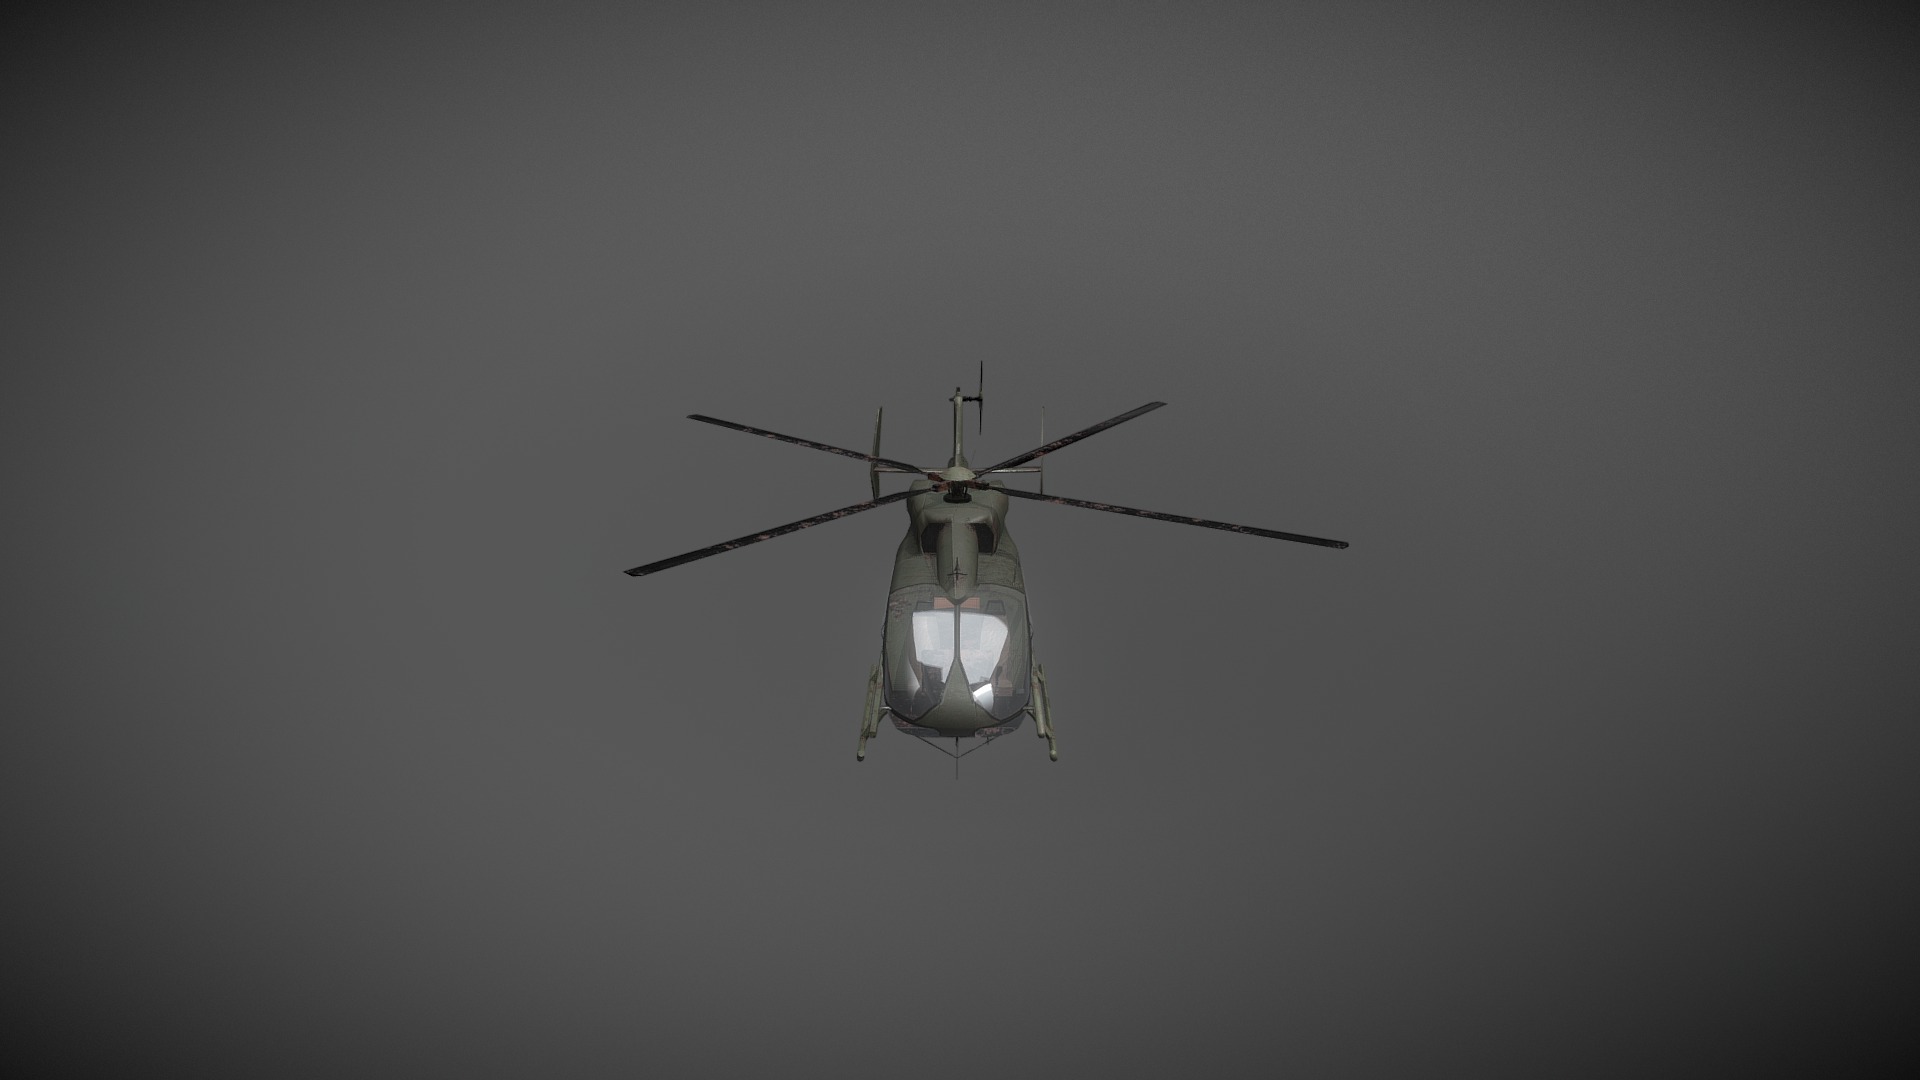 3D model H-145 - This is a 3D model of the H-145. The 3D model is about a helicopter flying in the sky.